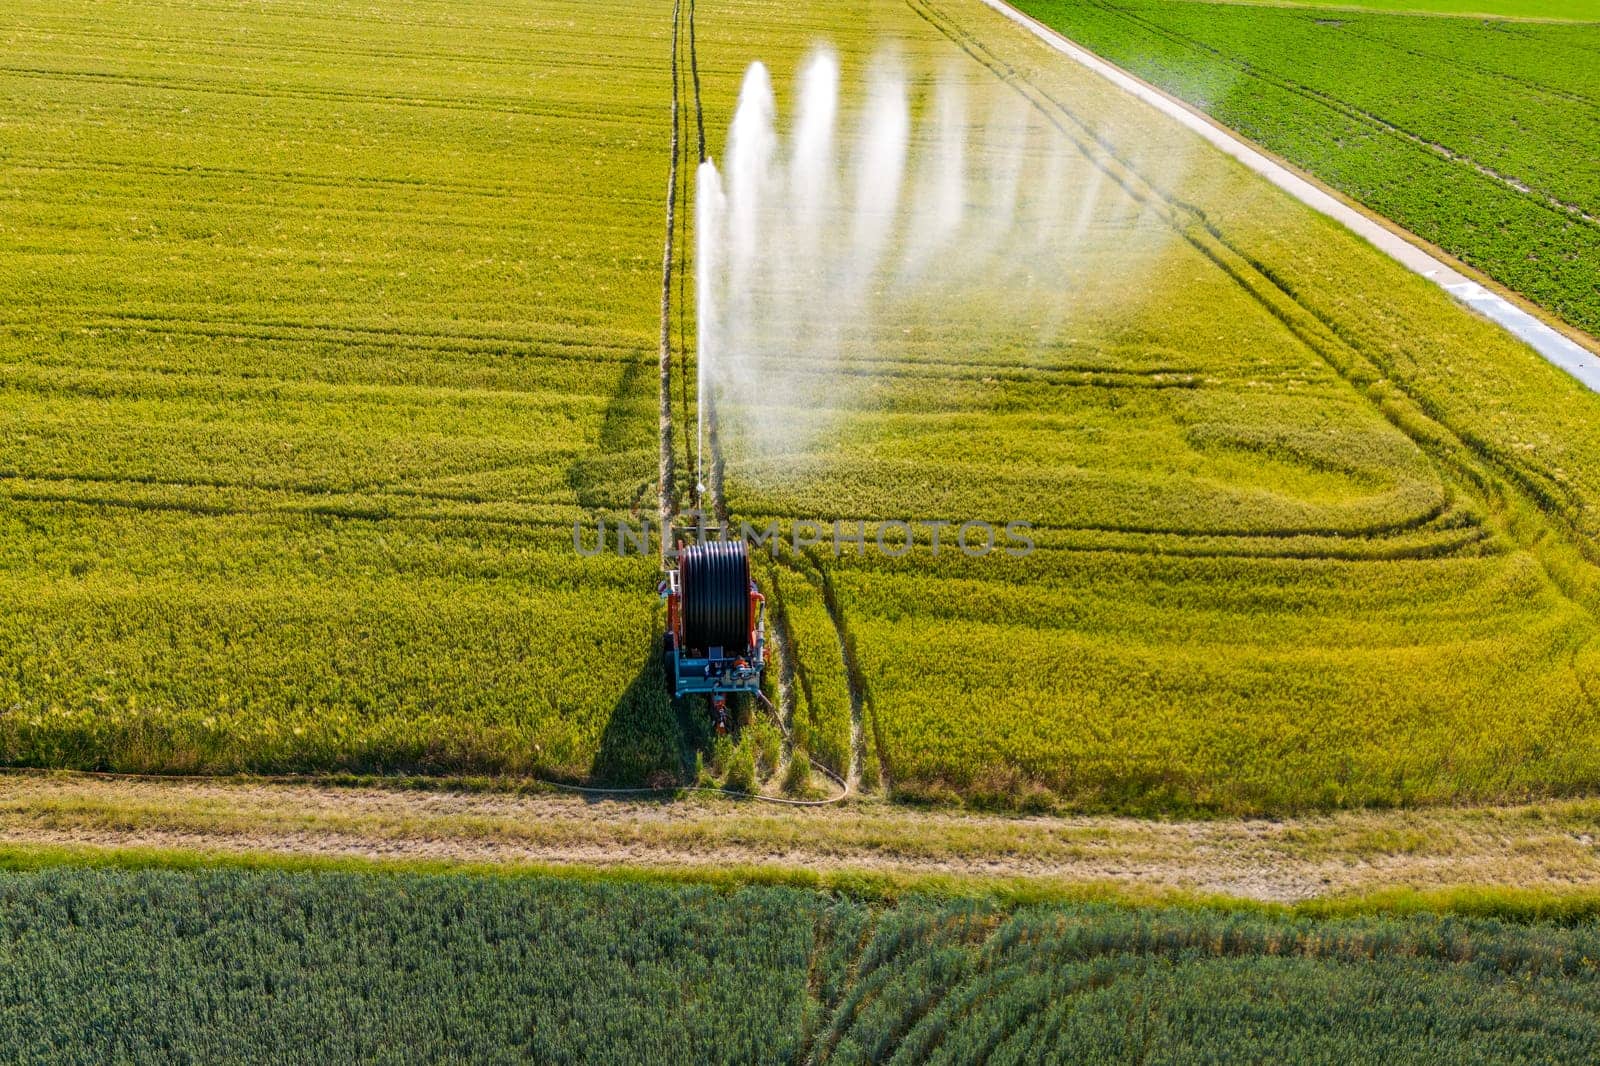 Irrigation water is blown away by the wind on a field with grain, heat in Germany